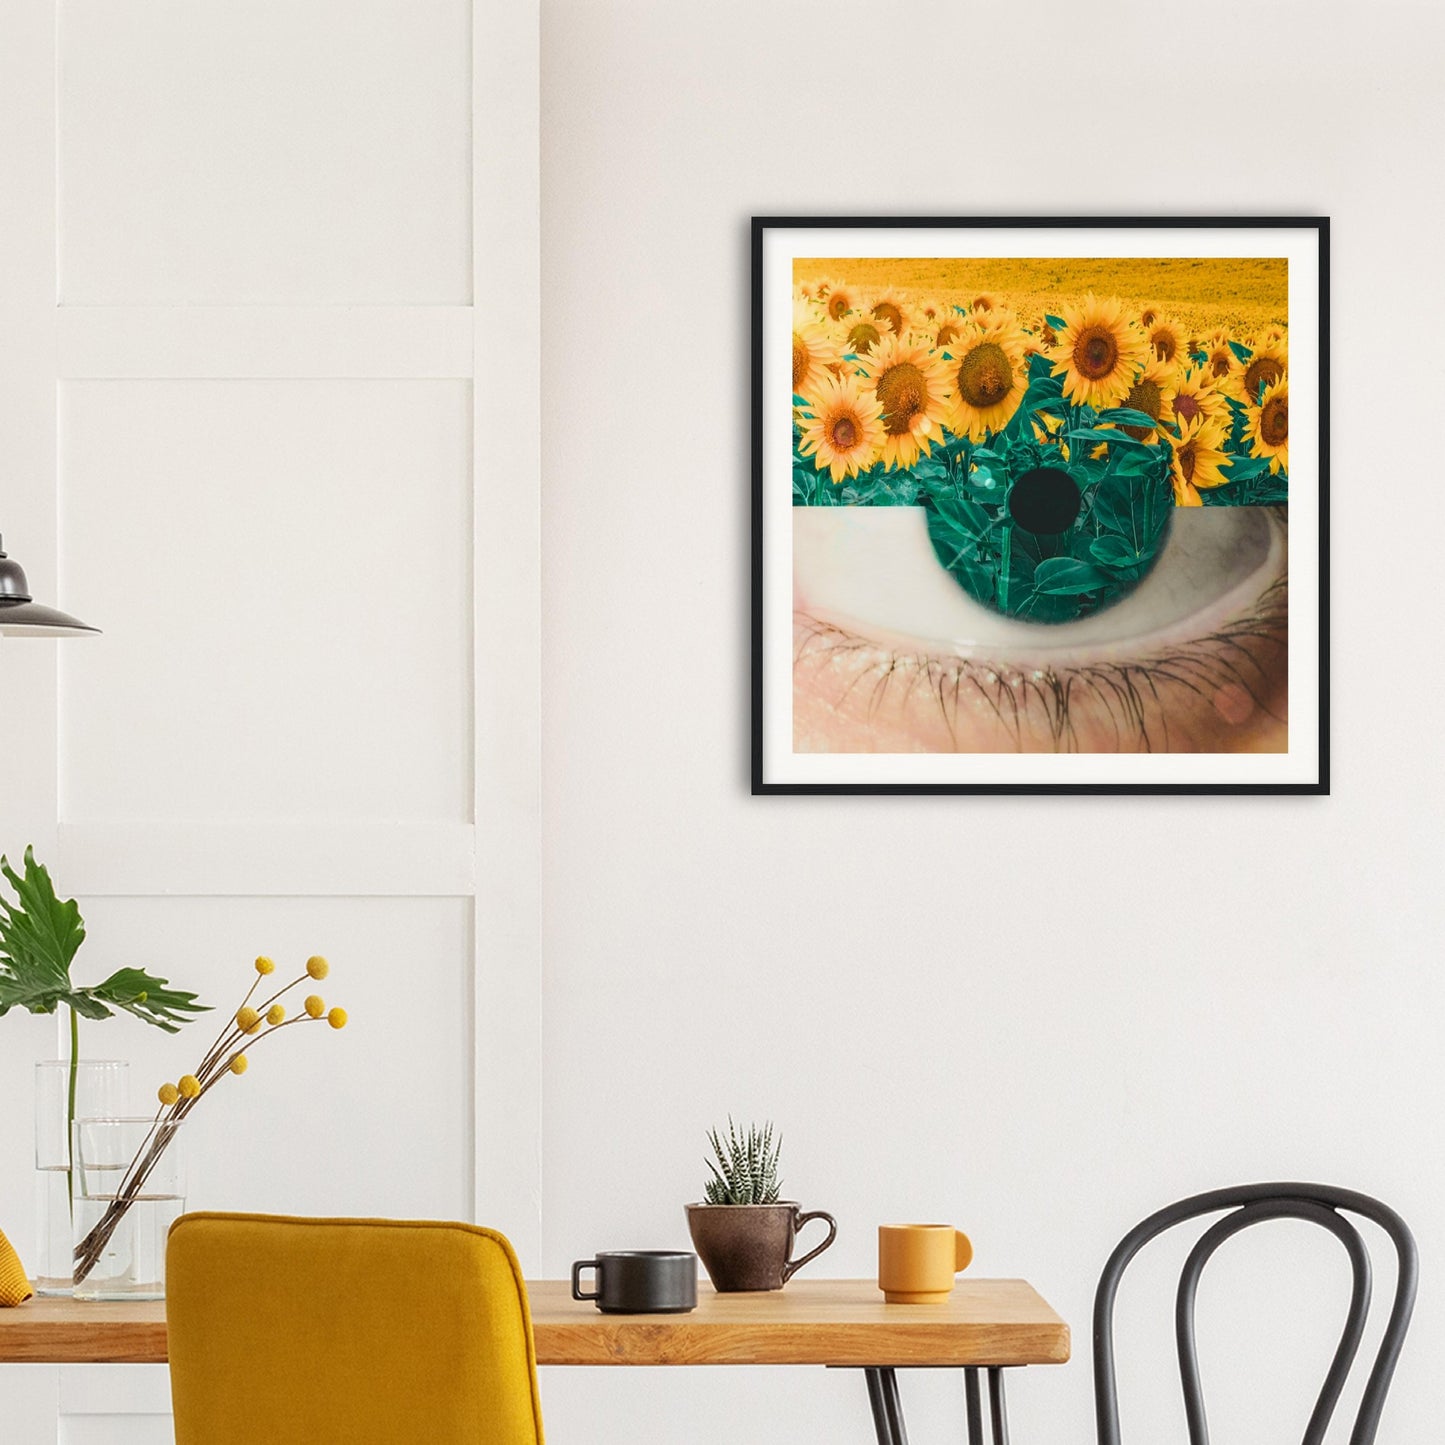 Blossoming Vision - Museum-Quality Framed Art Print